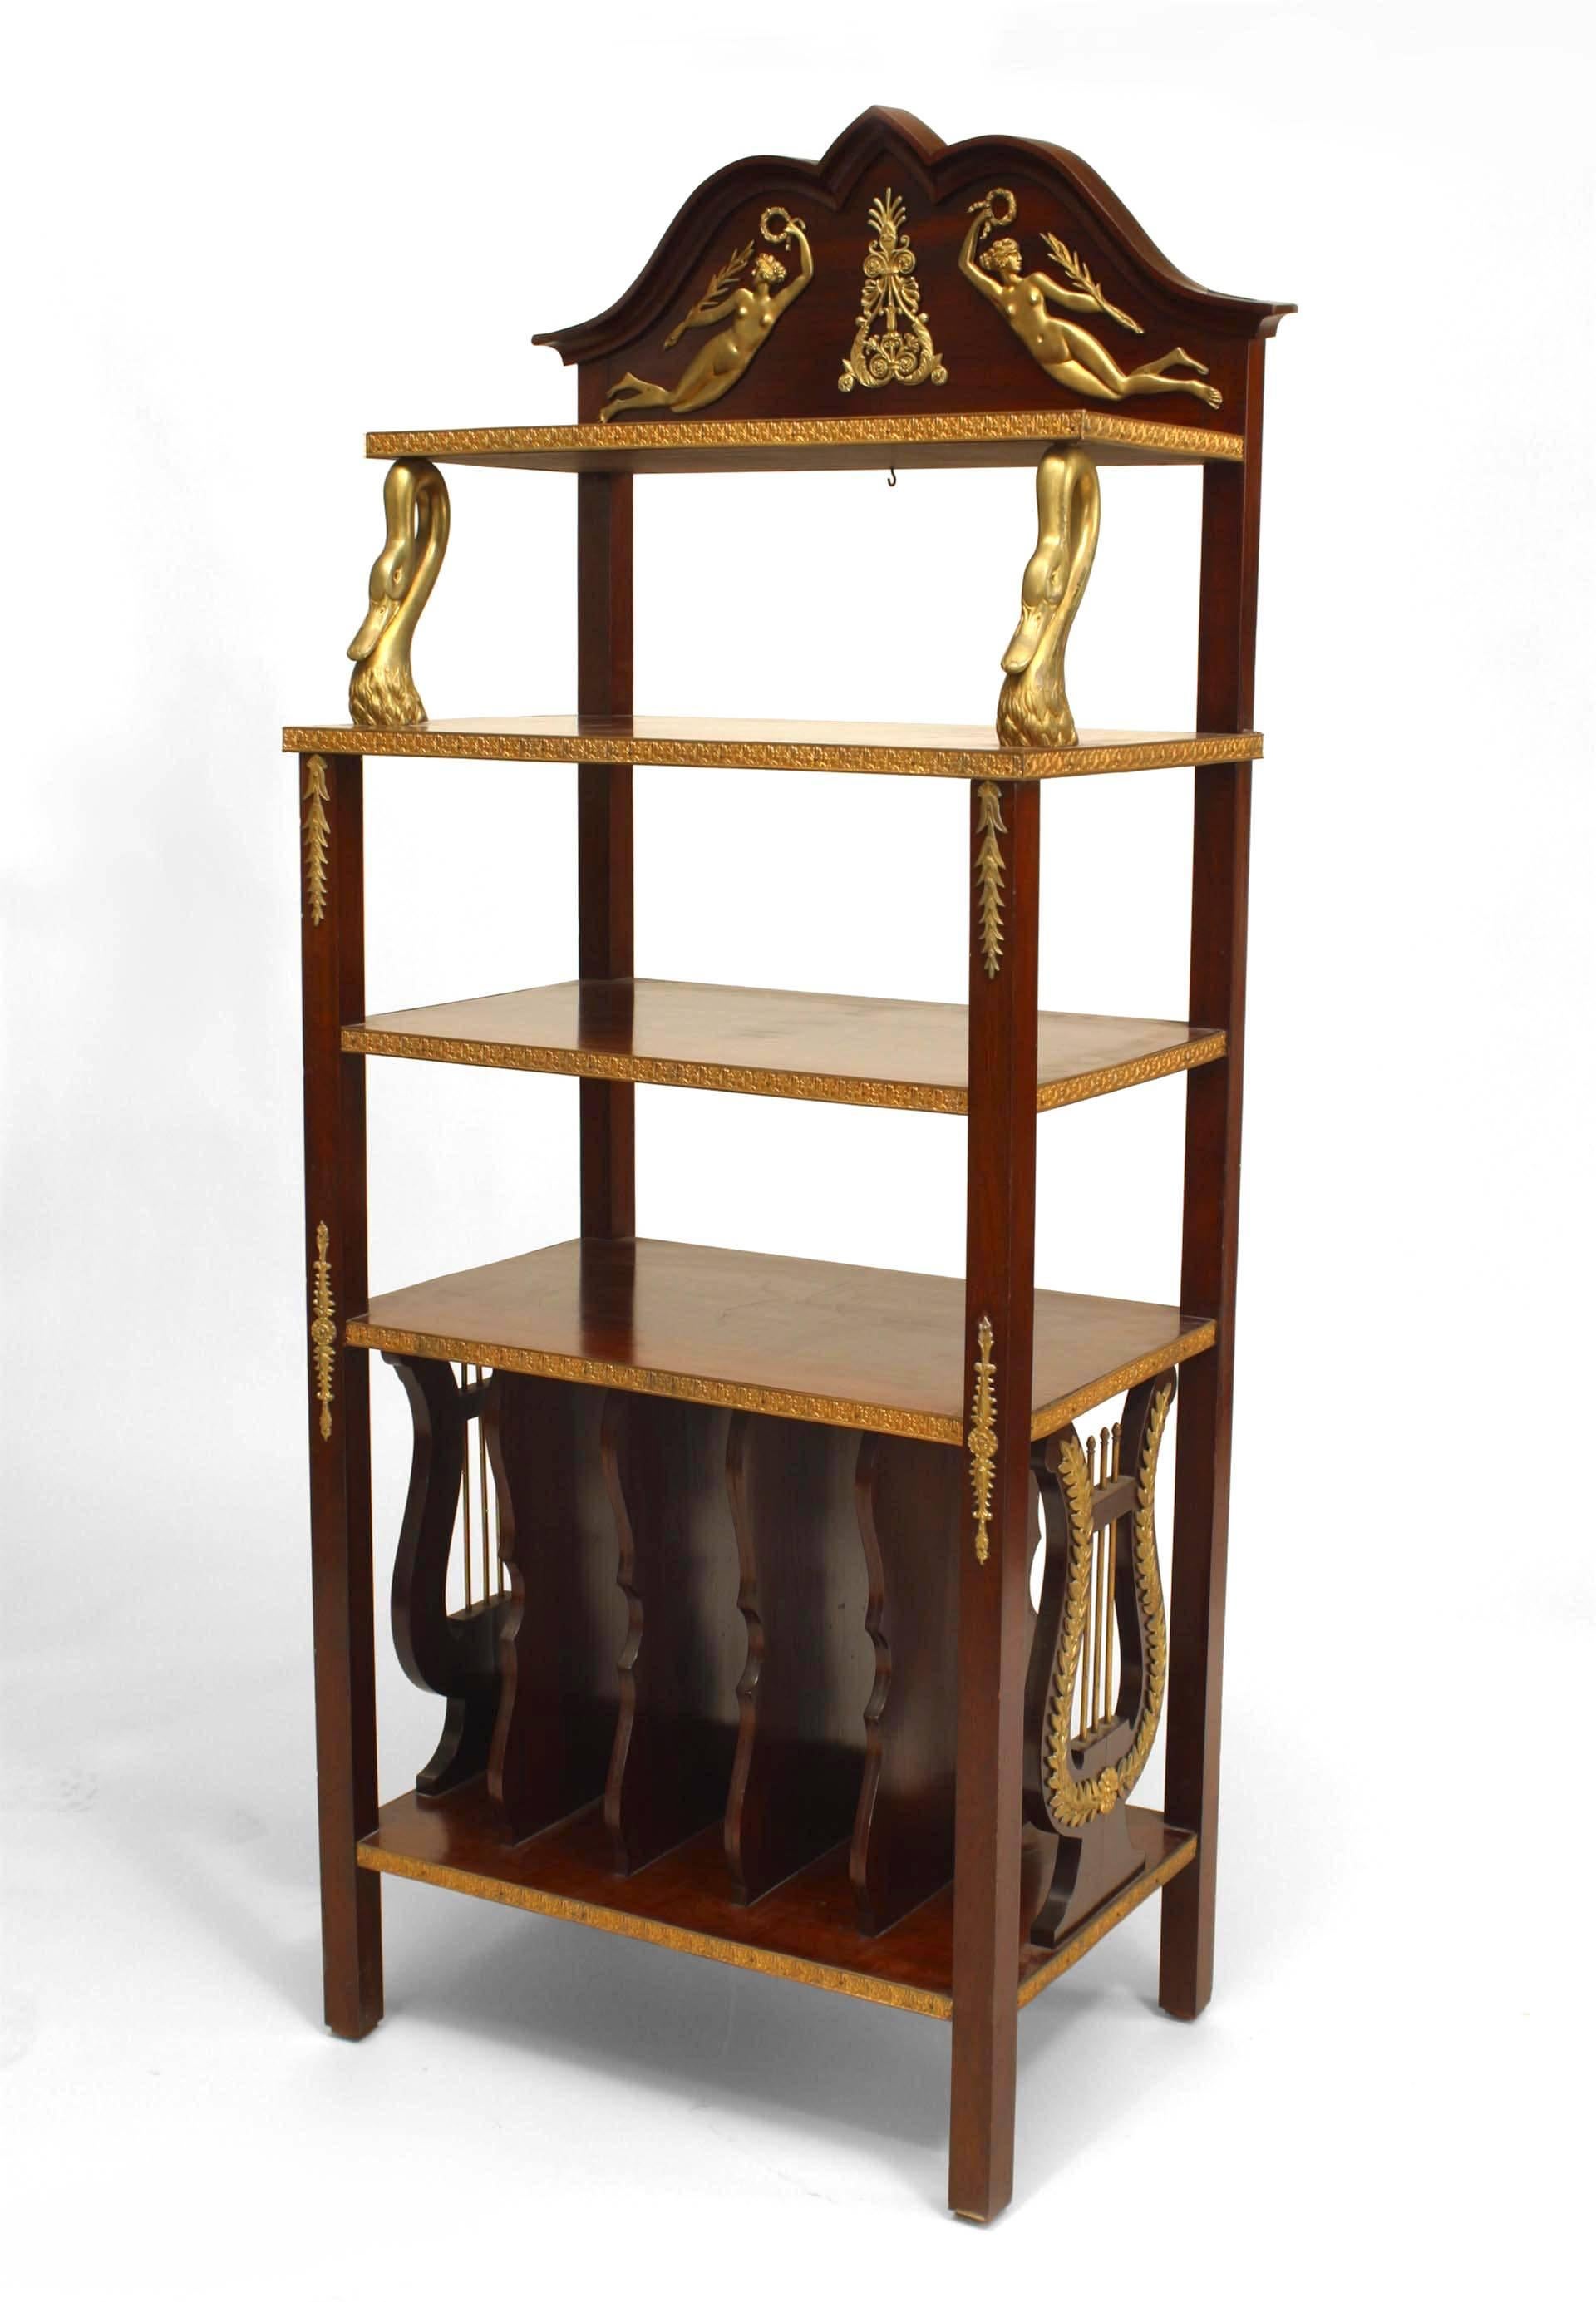 French Empire-style (19th Century) mahogany etagere with bronze trim and shaped back rail above shelves with lyre form sides.
